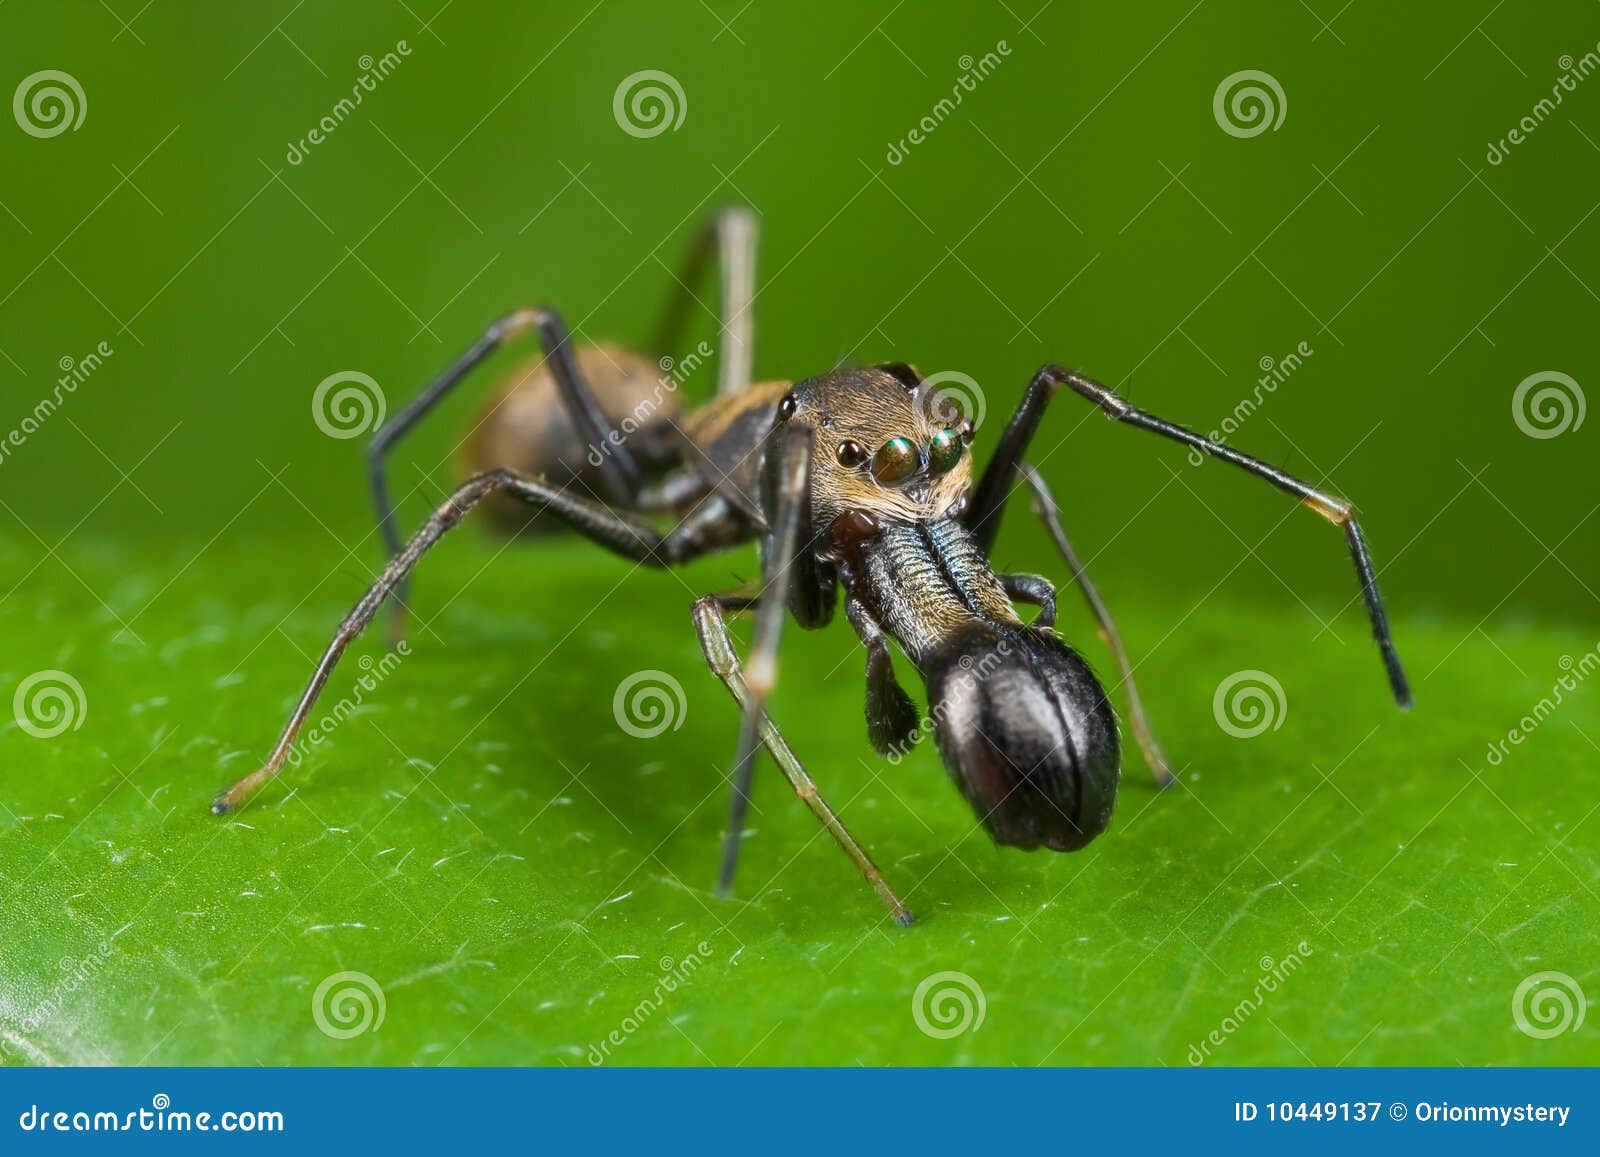 ant-mimic jumping spider